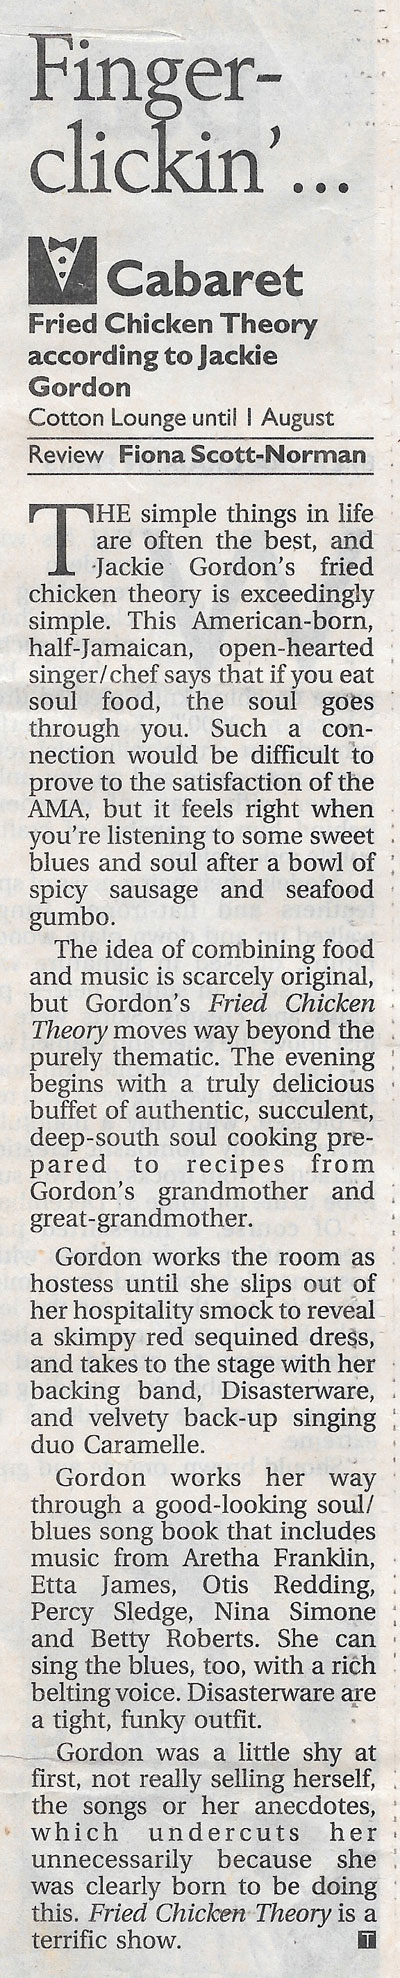 The Fried Chicken Theory According review 1999 The Age